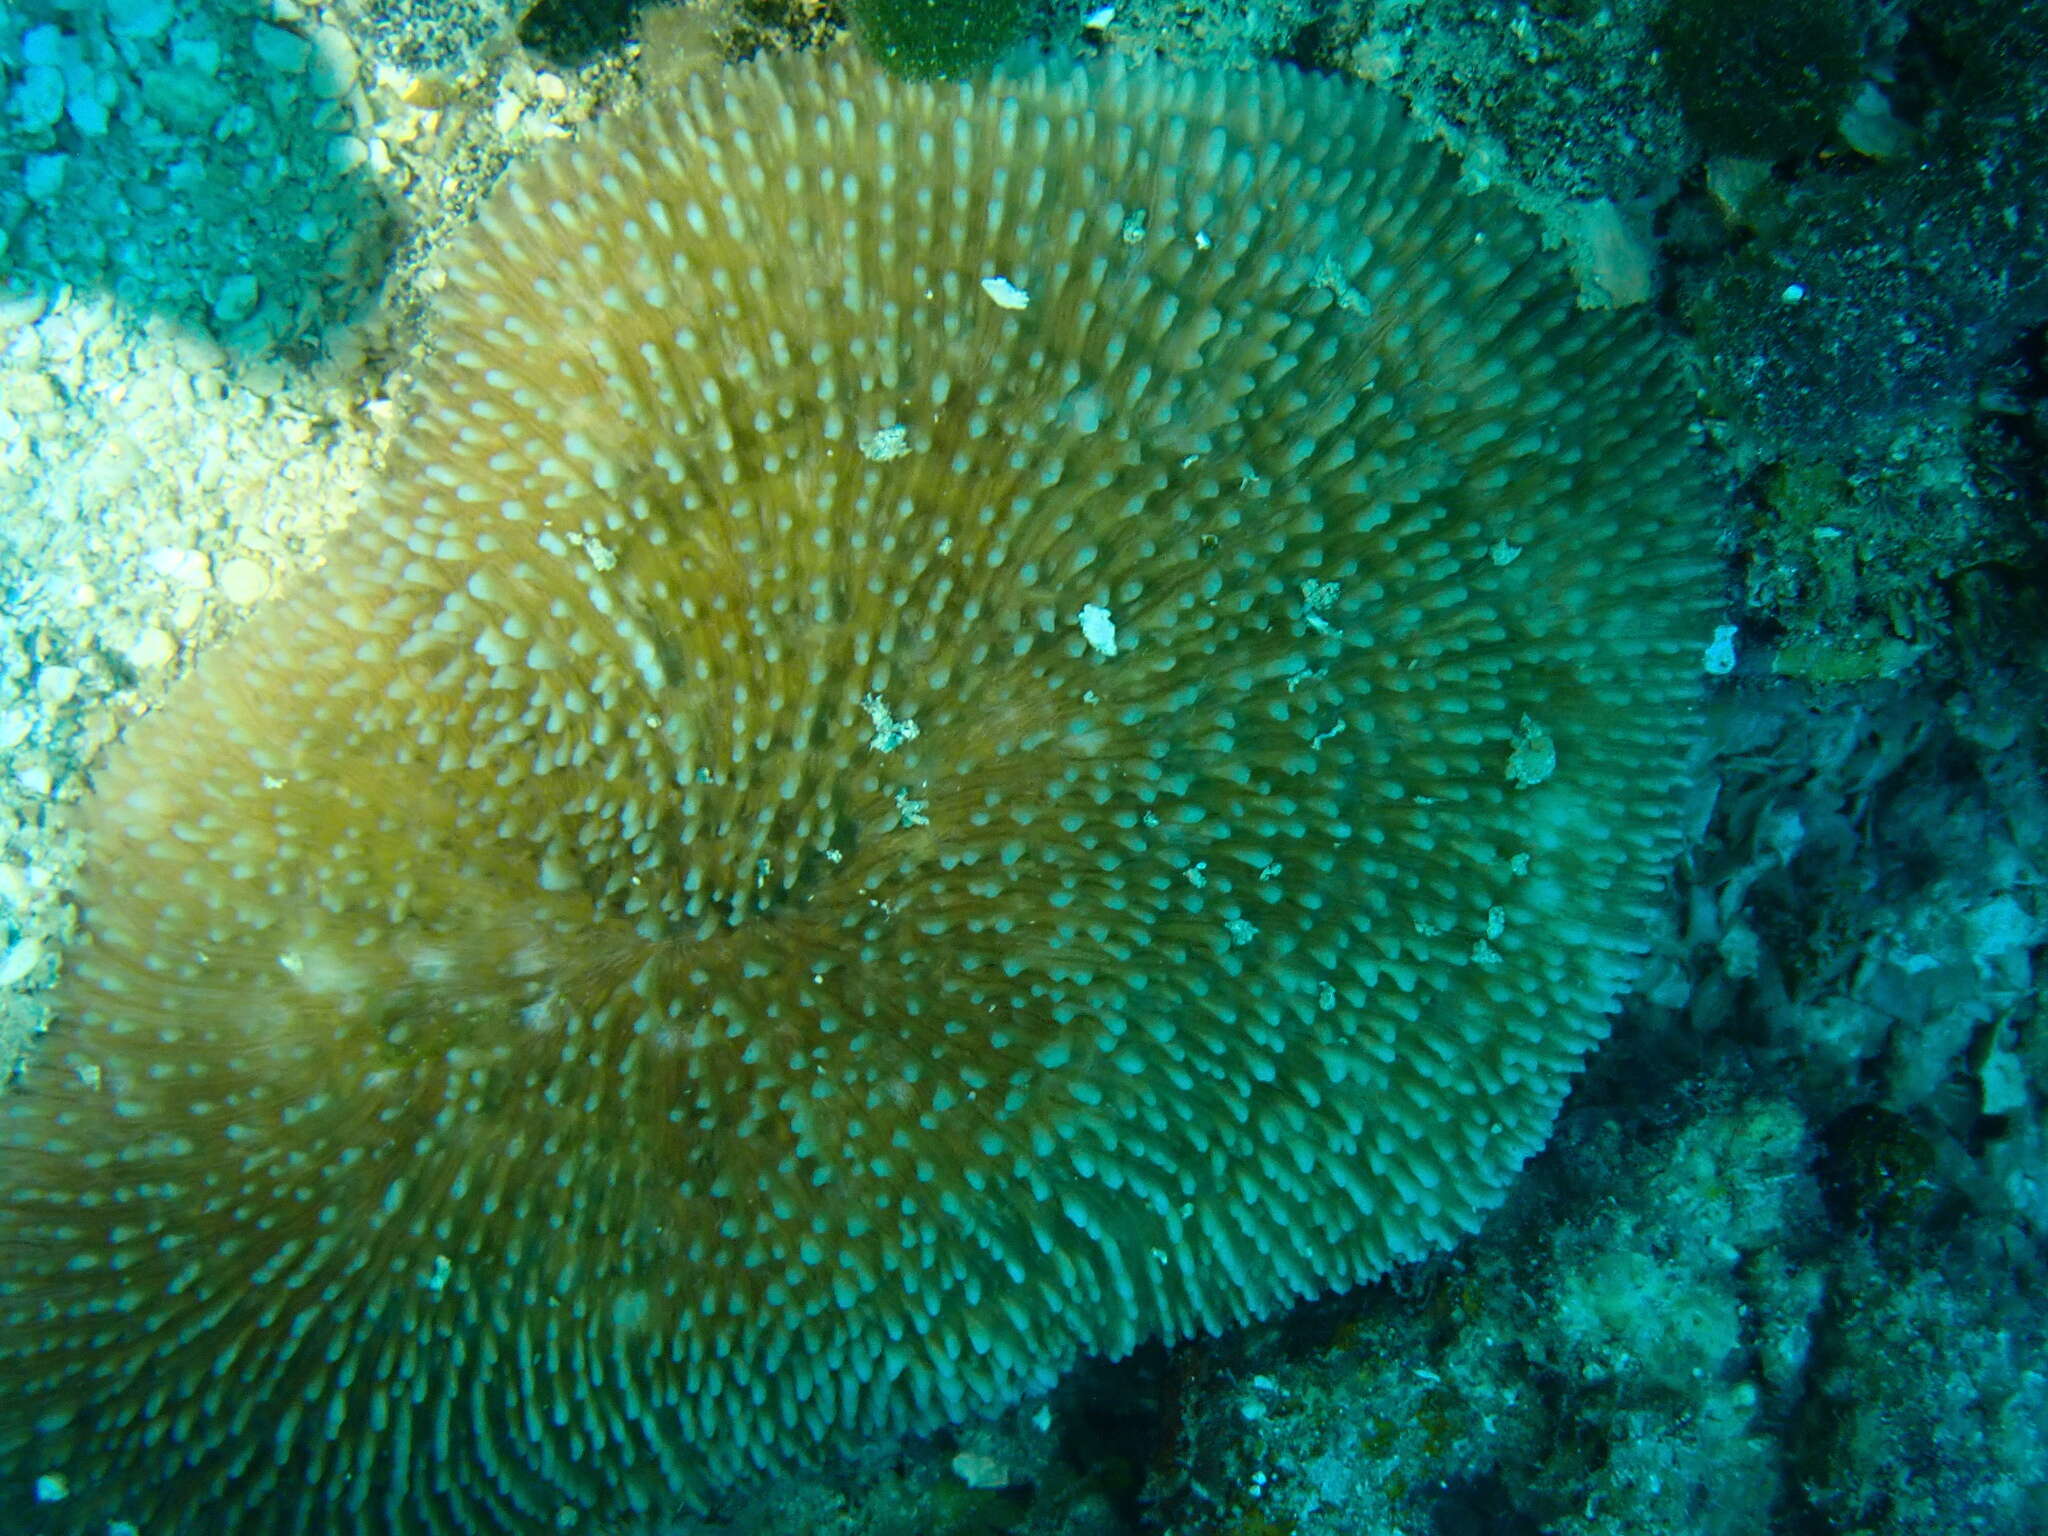 Image of plate coral